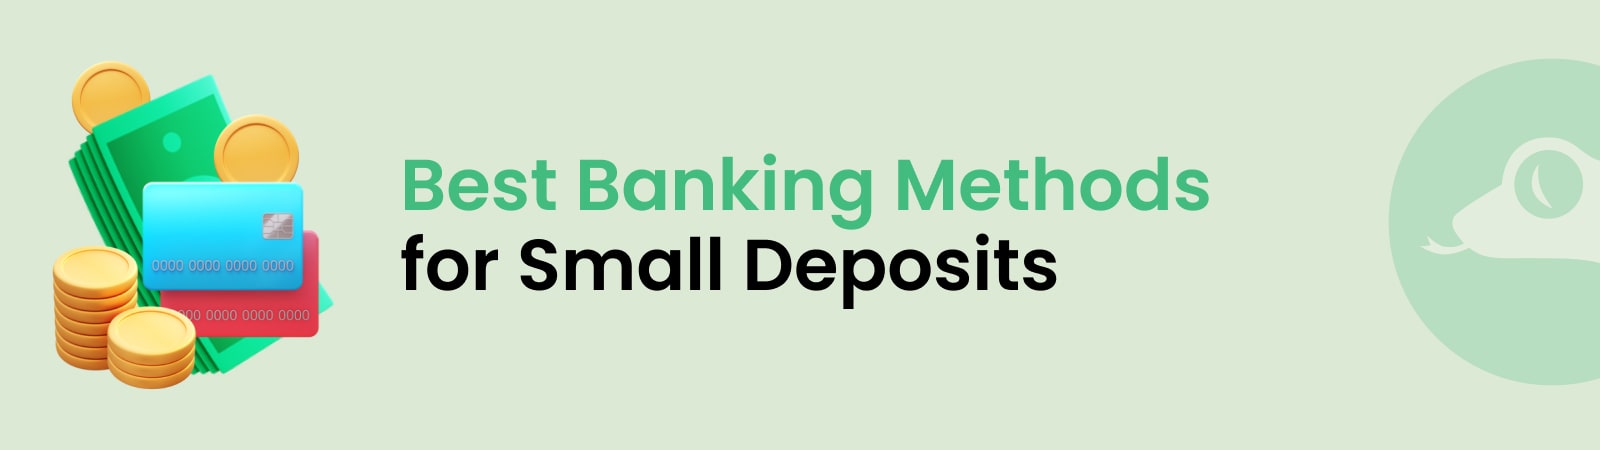 best banking methods for small deposits